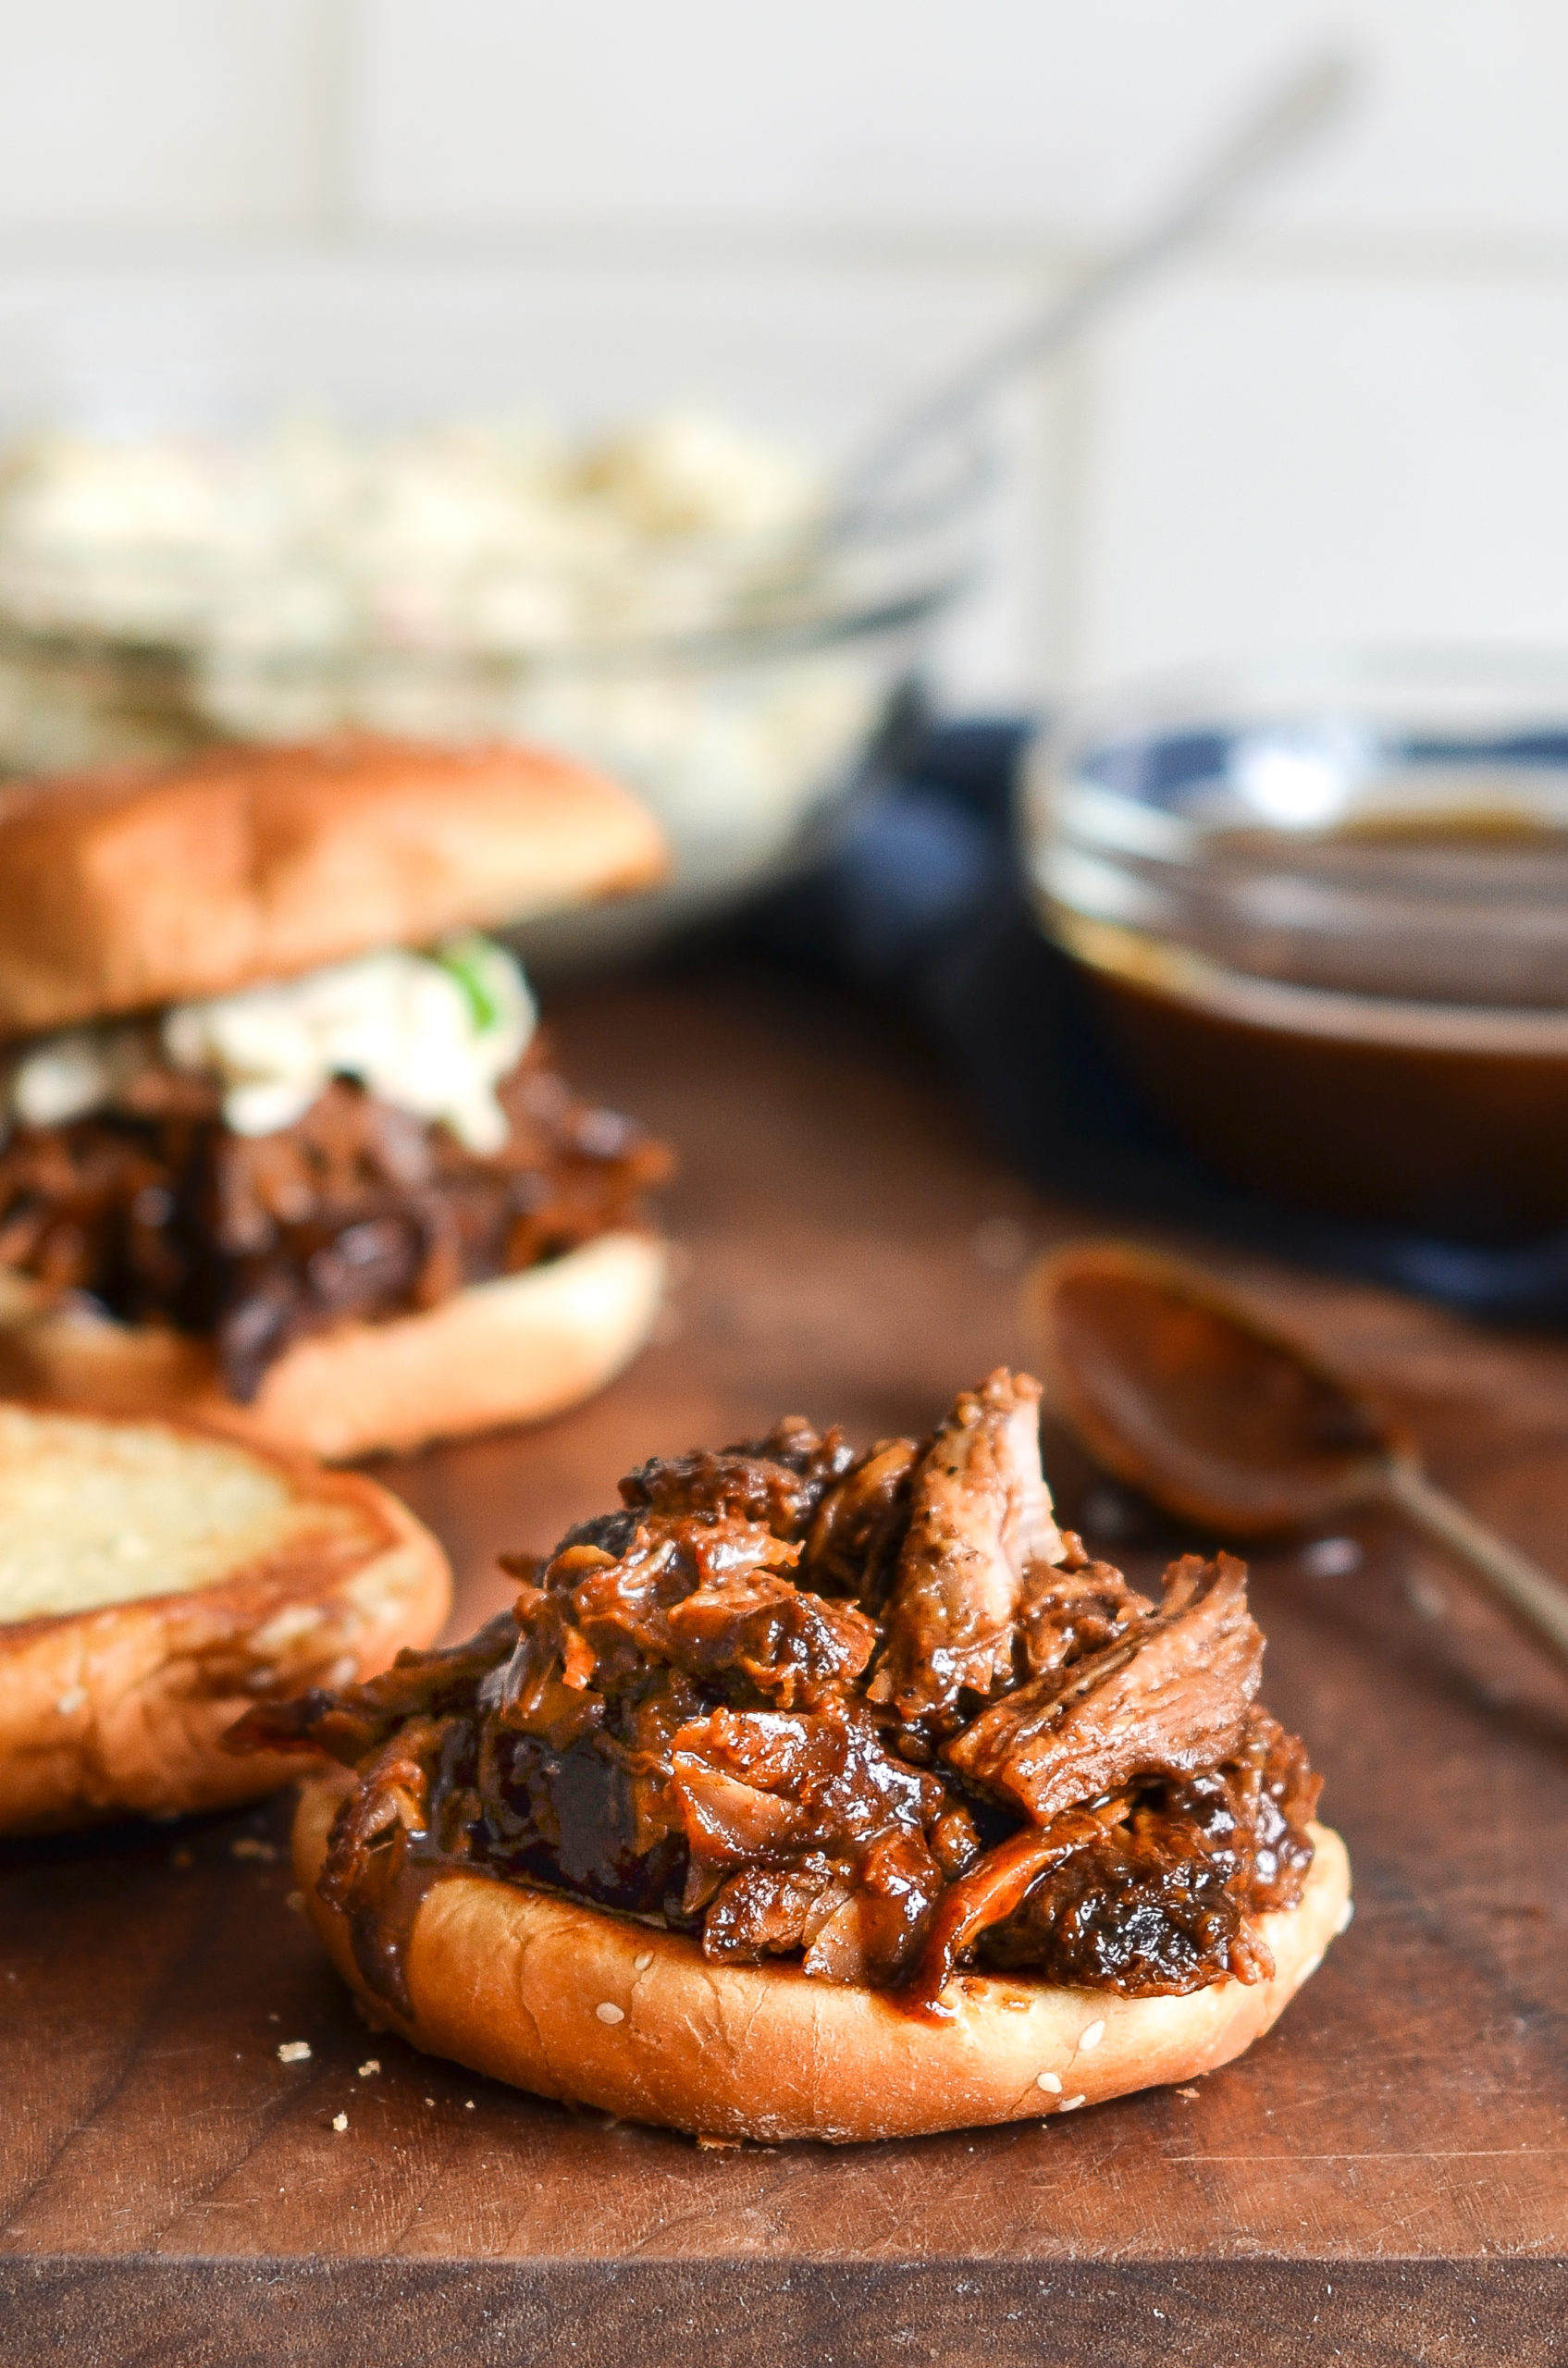 https://www.onceuponachef.com/images/2020/04/Pulled-Pork-Barbecue-scaled.jpg